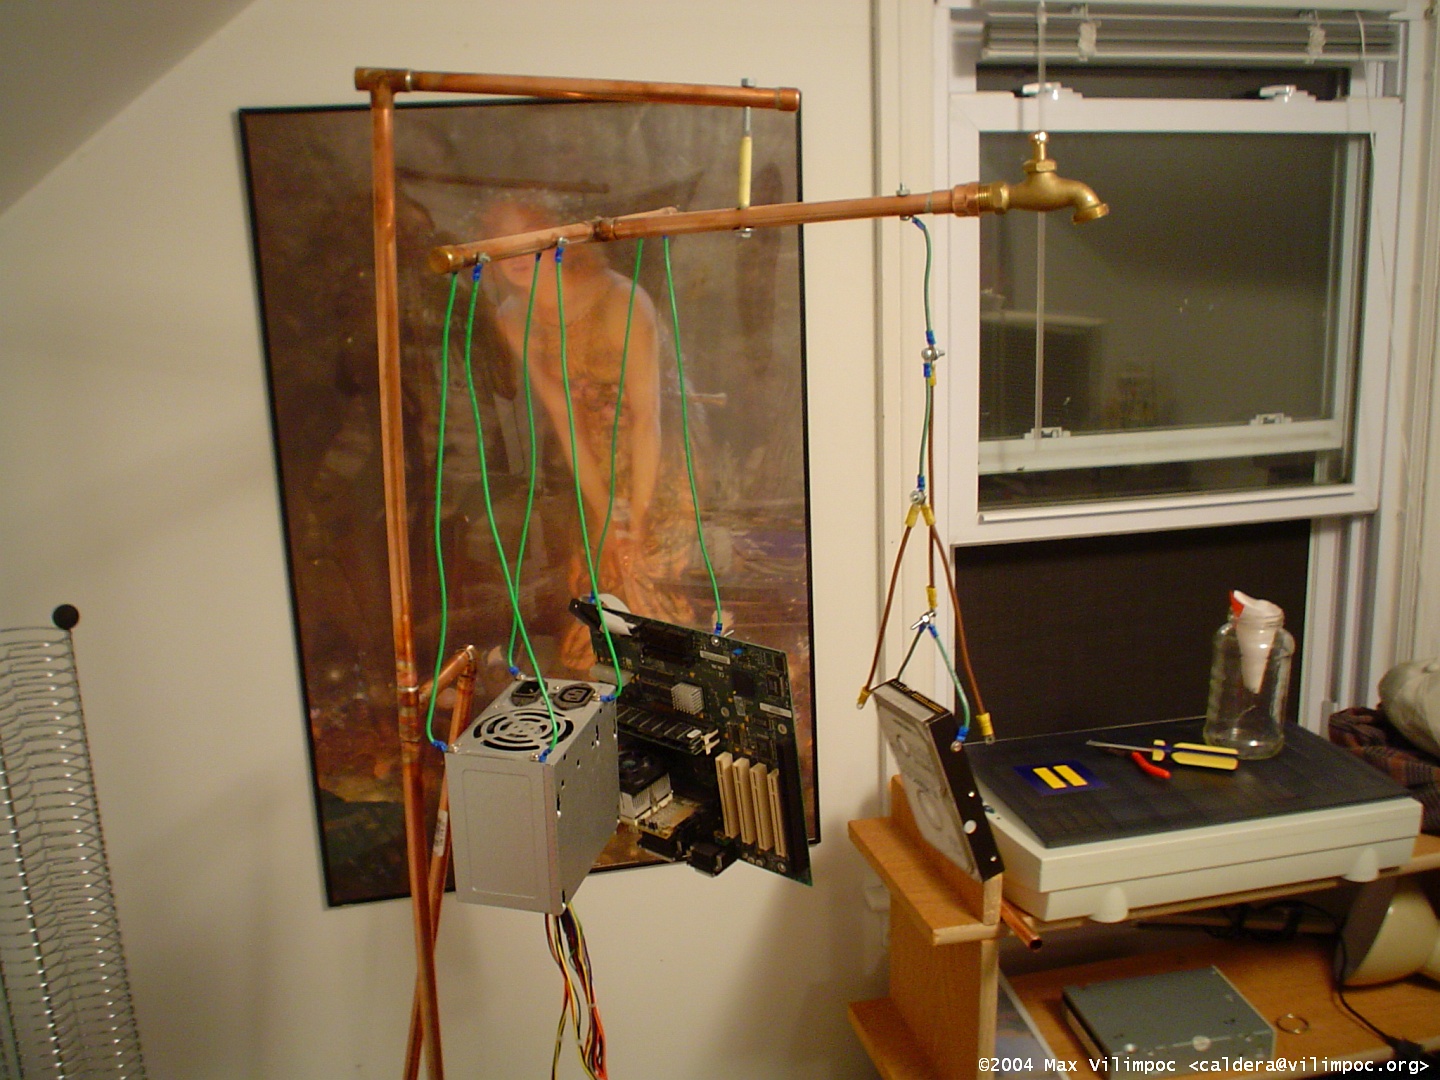 The computer being reassembled in the attic workroom, with parts hanging off the main horizontal arms